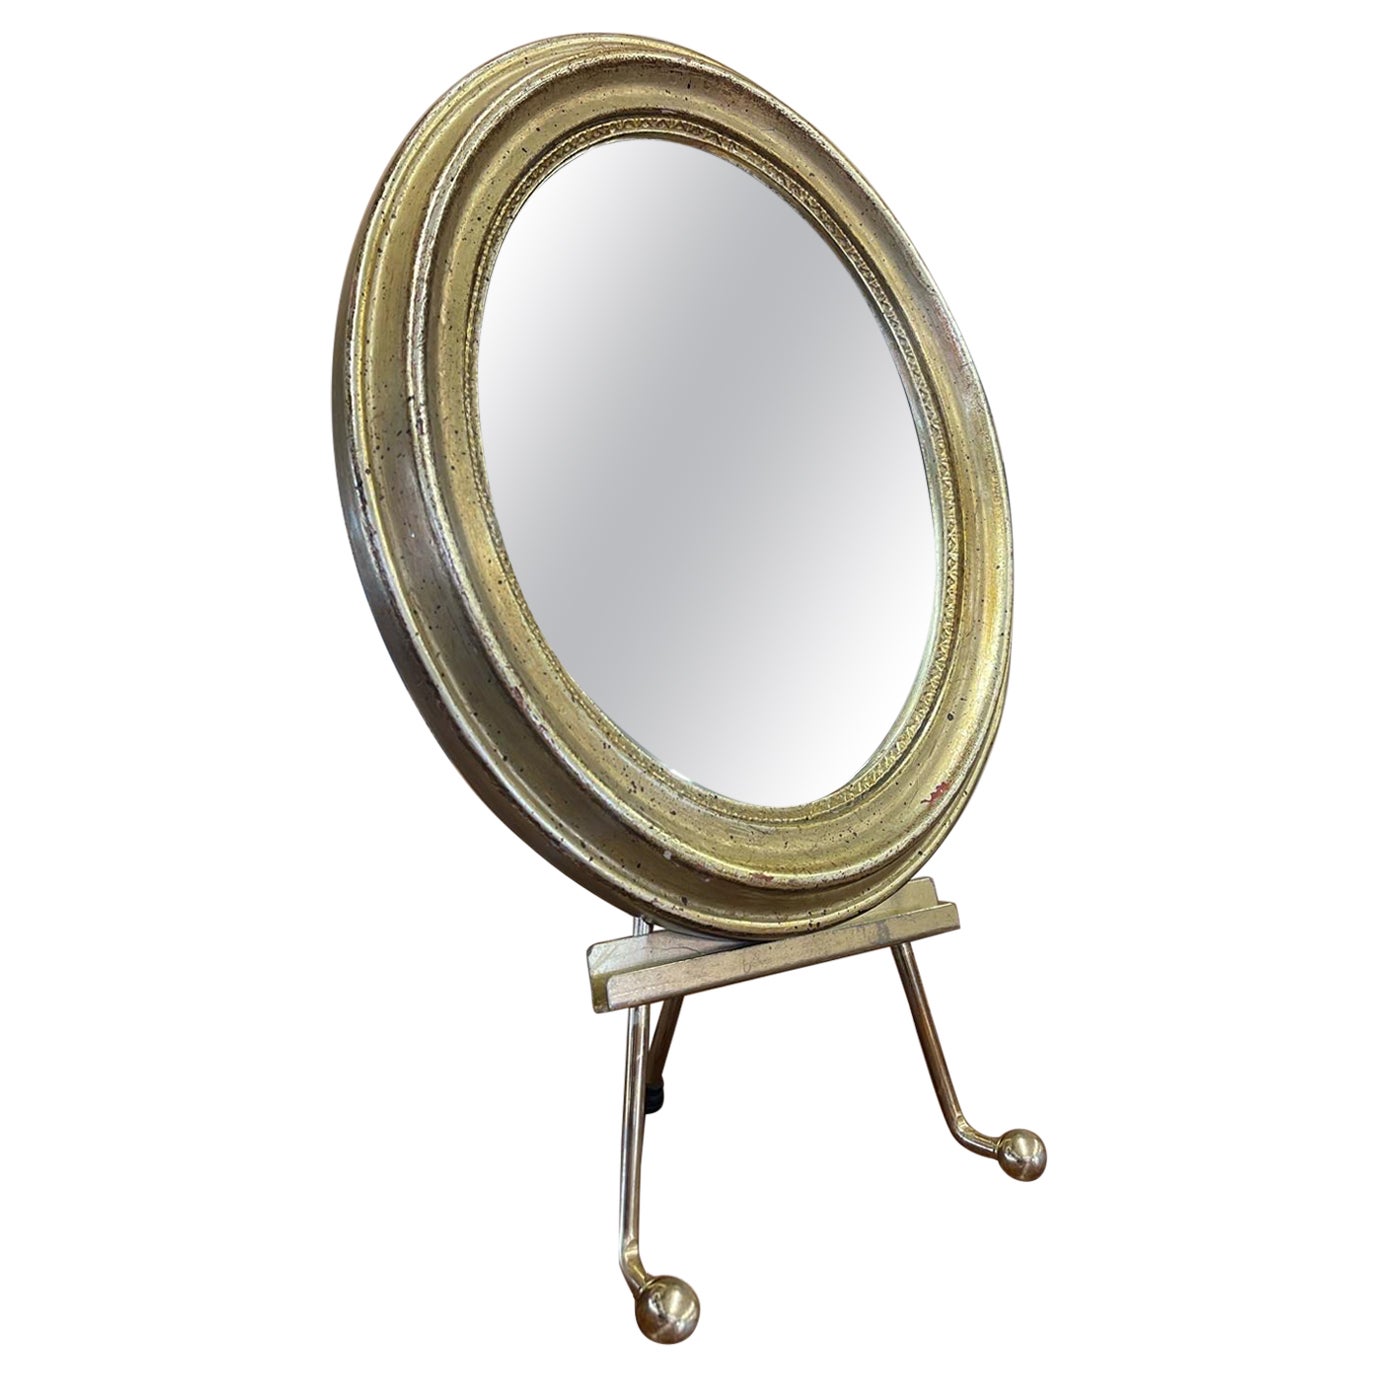 Vintage Oval Shaped Wall Mirror. For Sale